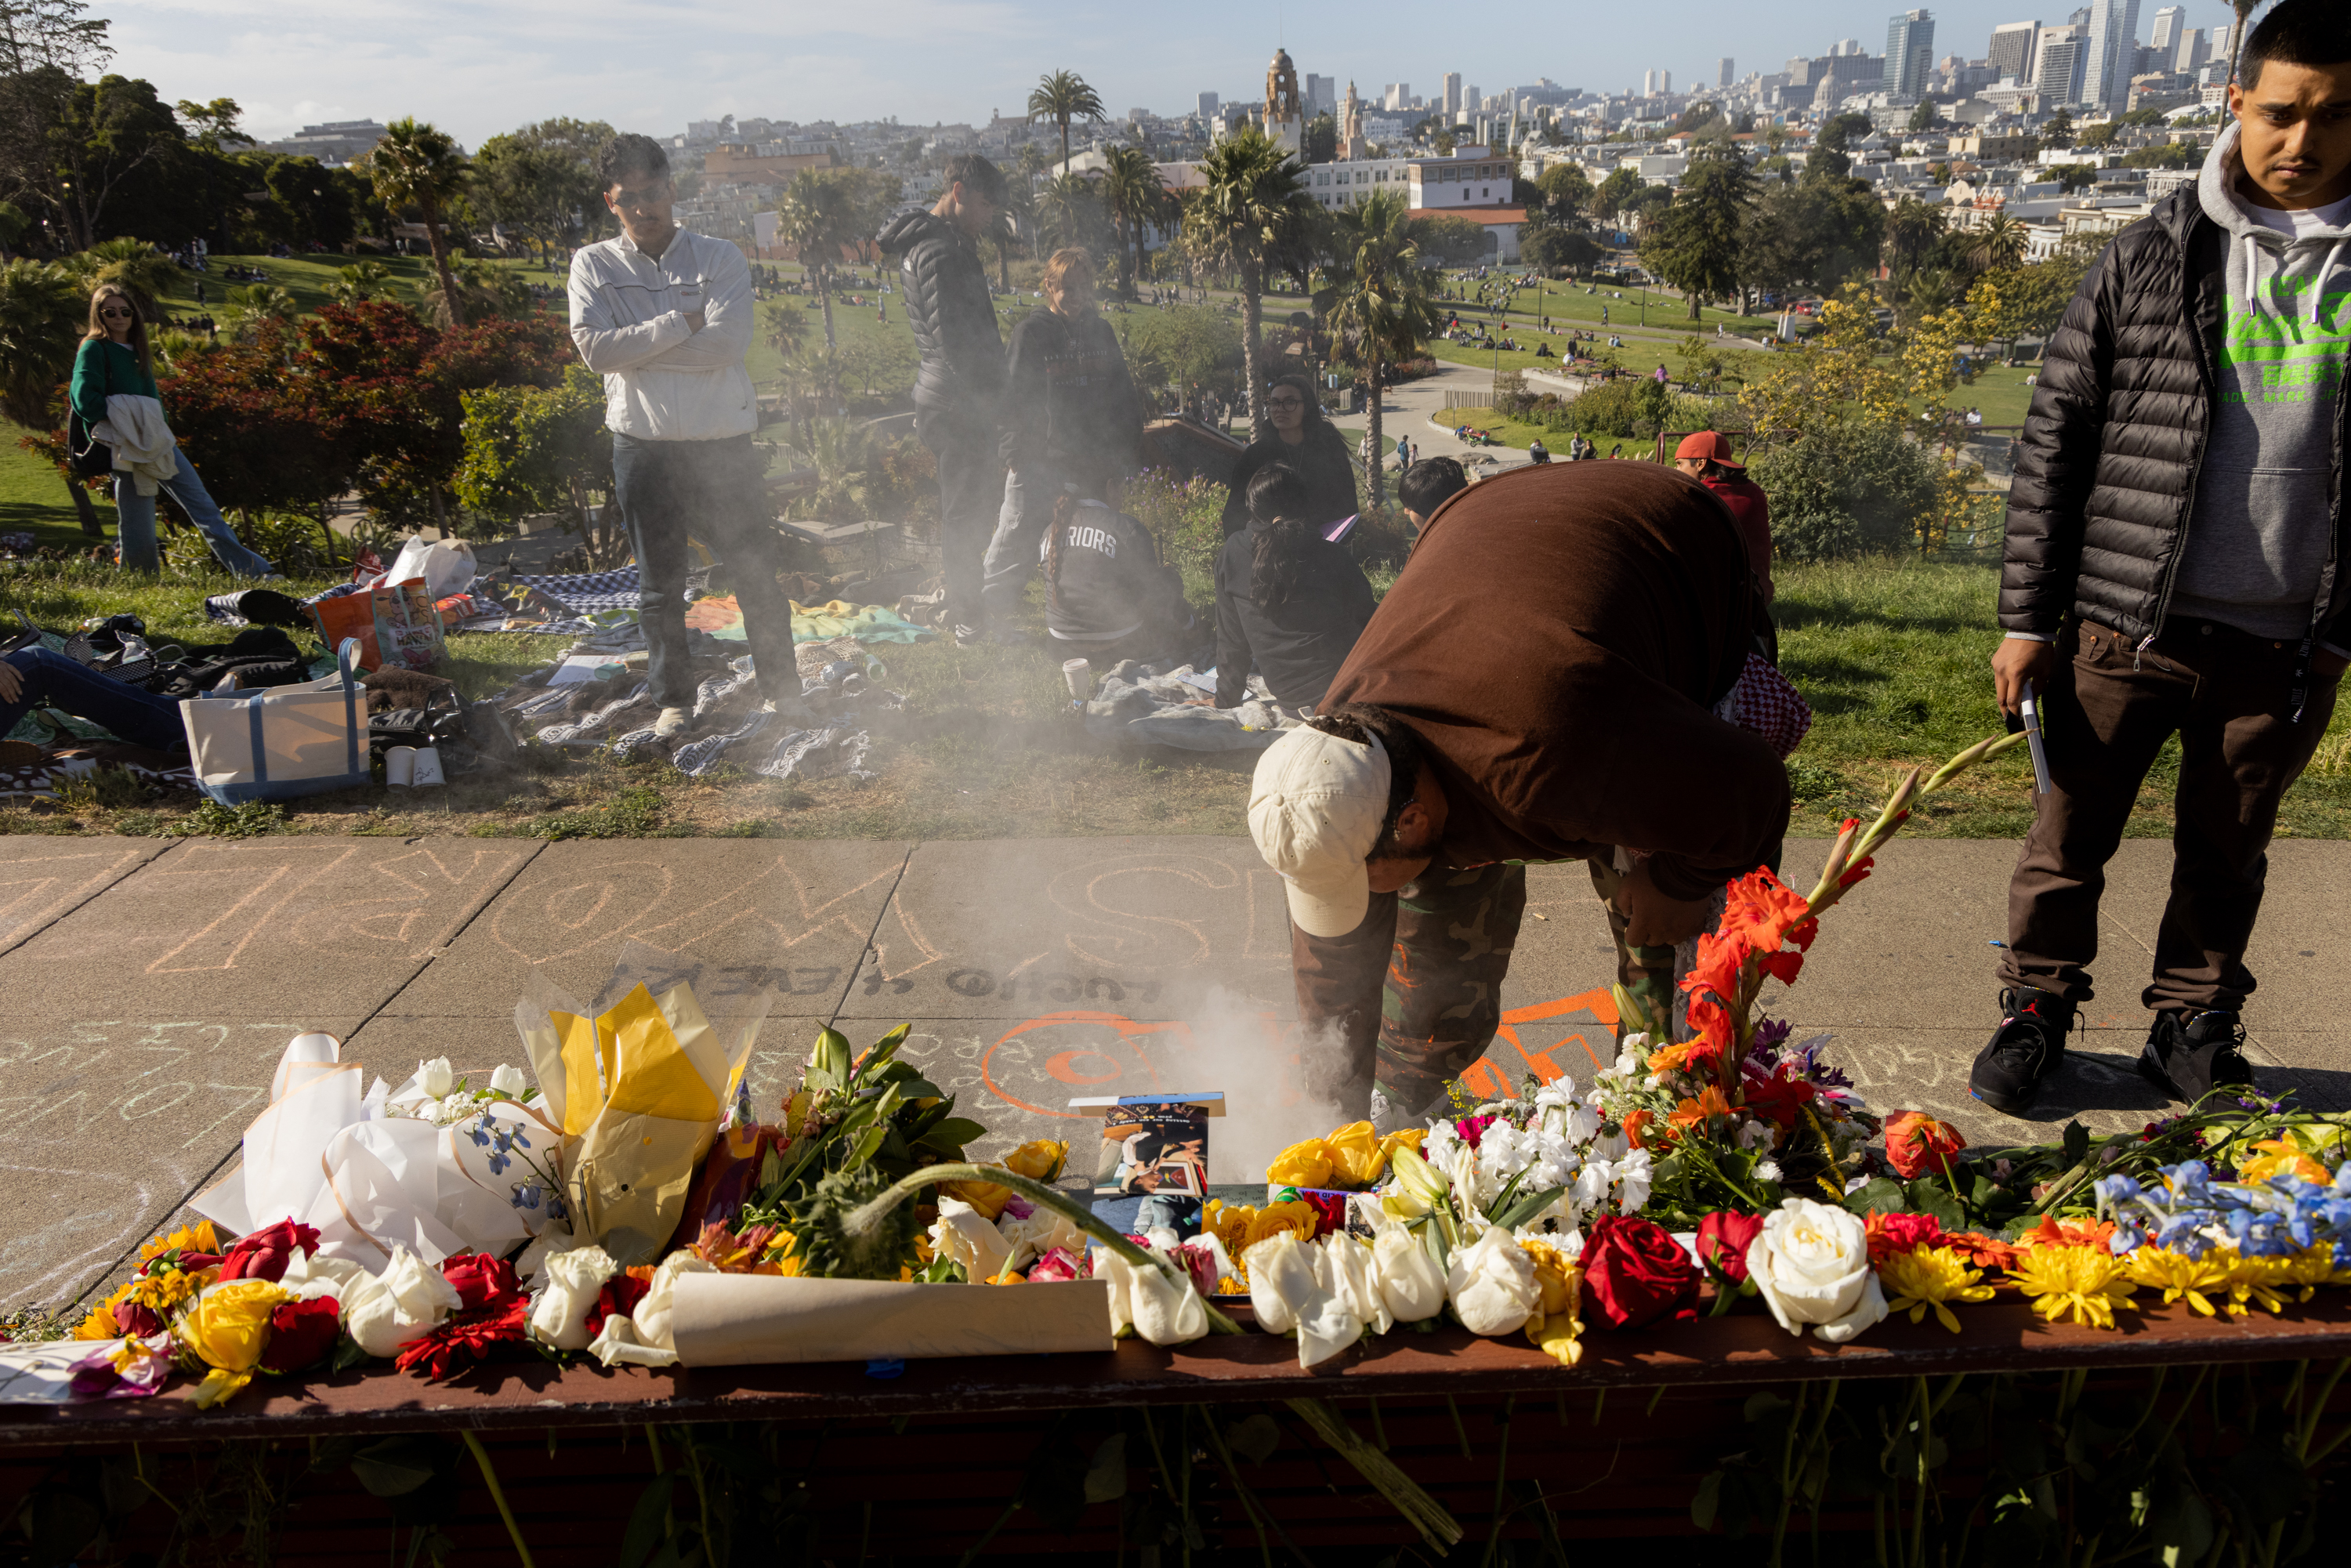 In a park, people gather near vibrant flowers and a memorial where a person bends over, creating smoke, while others stand or sit on blankets around the area.